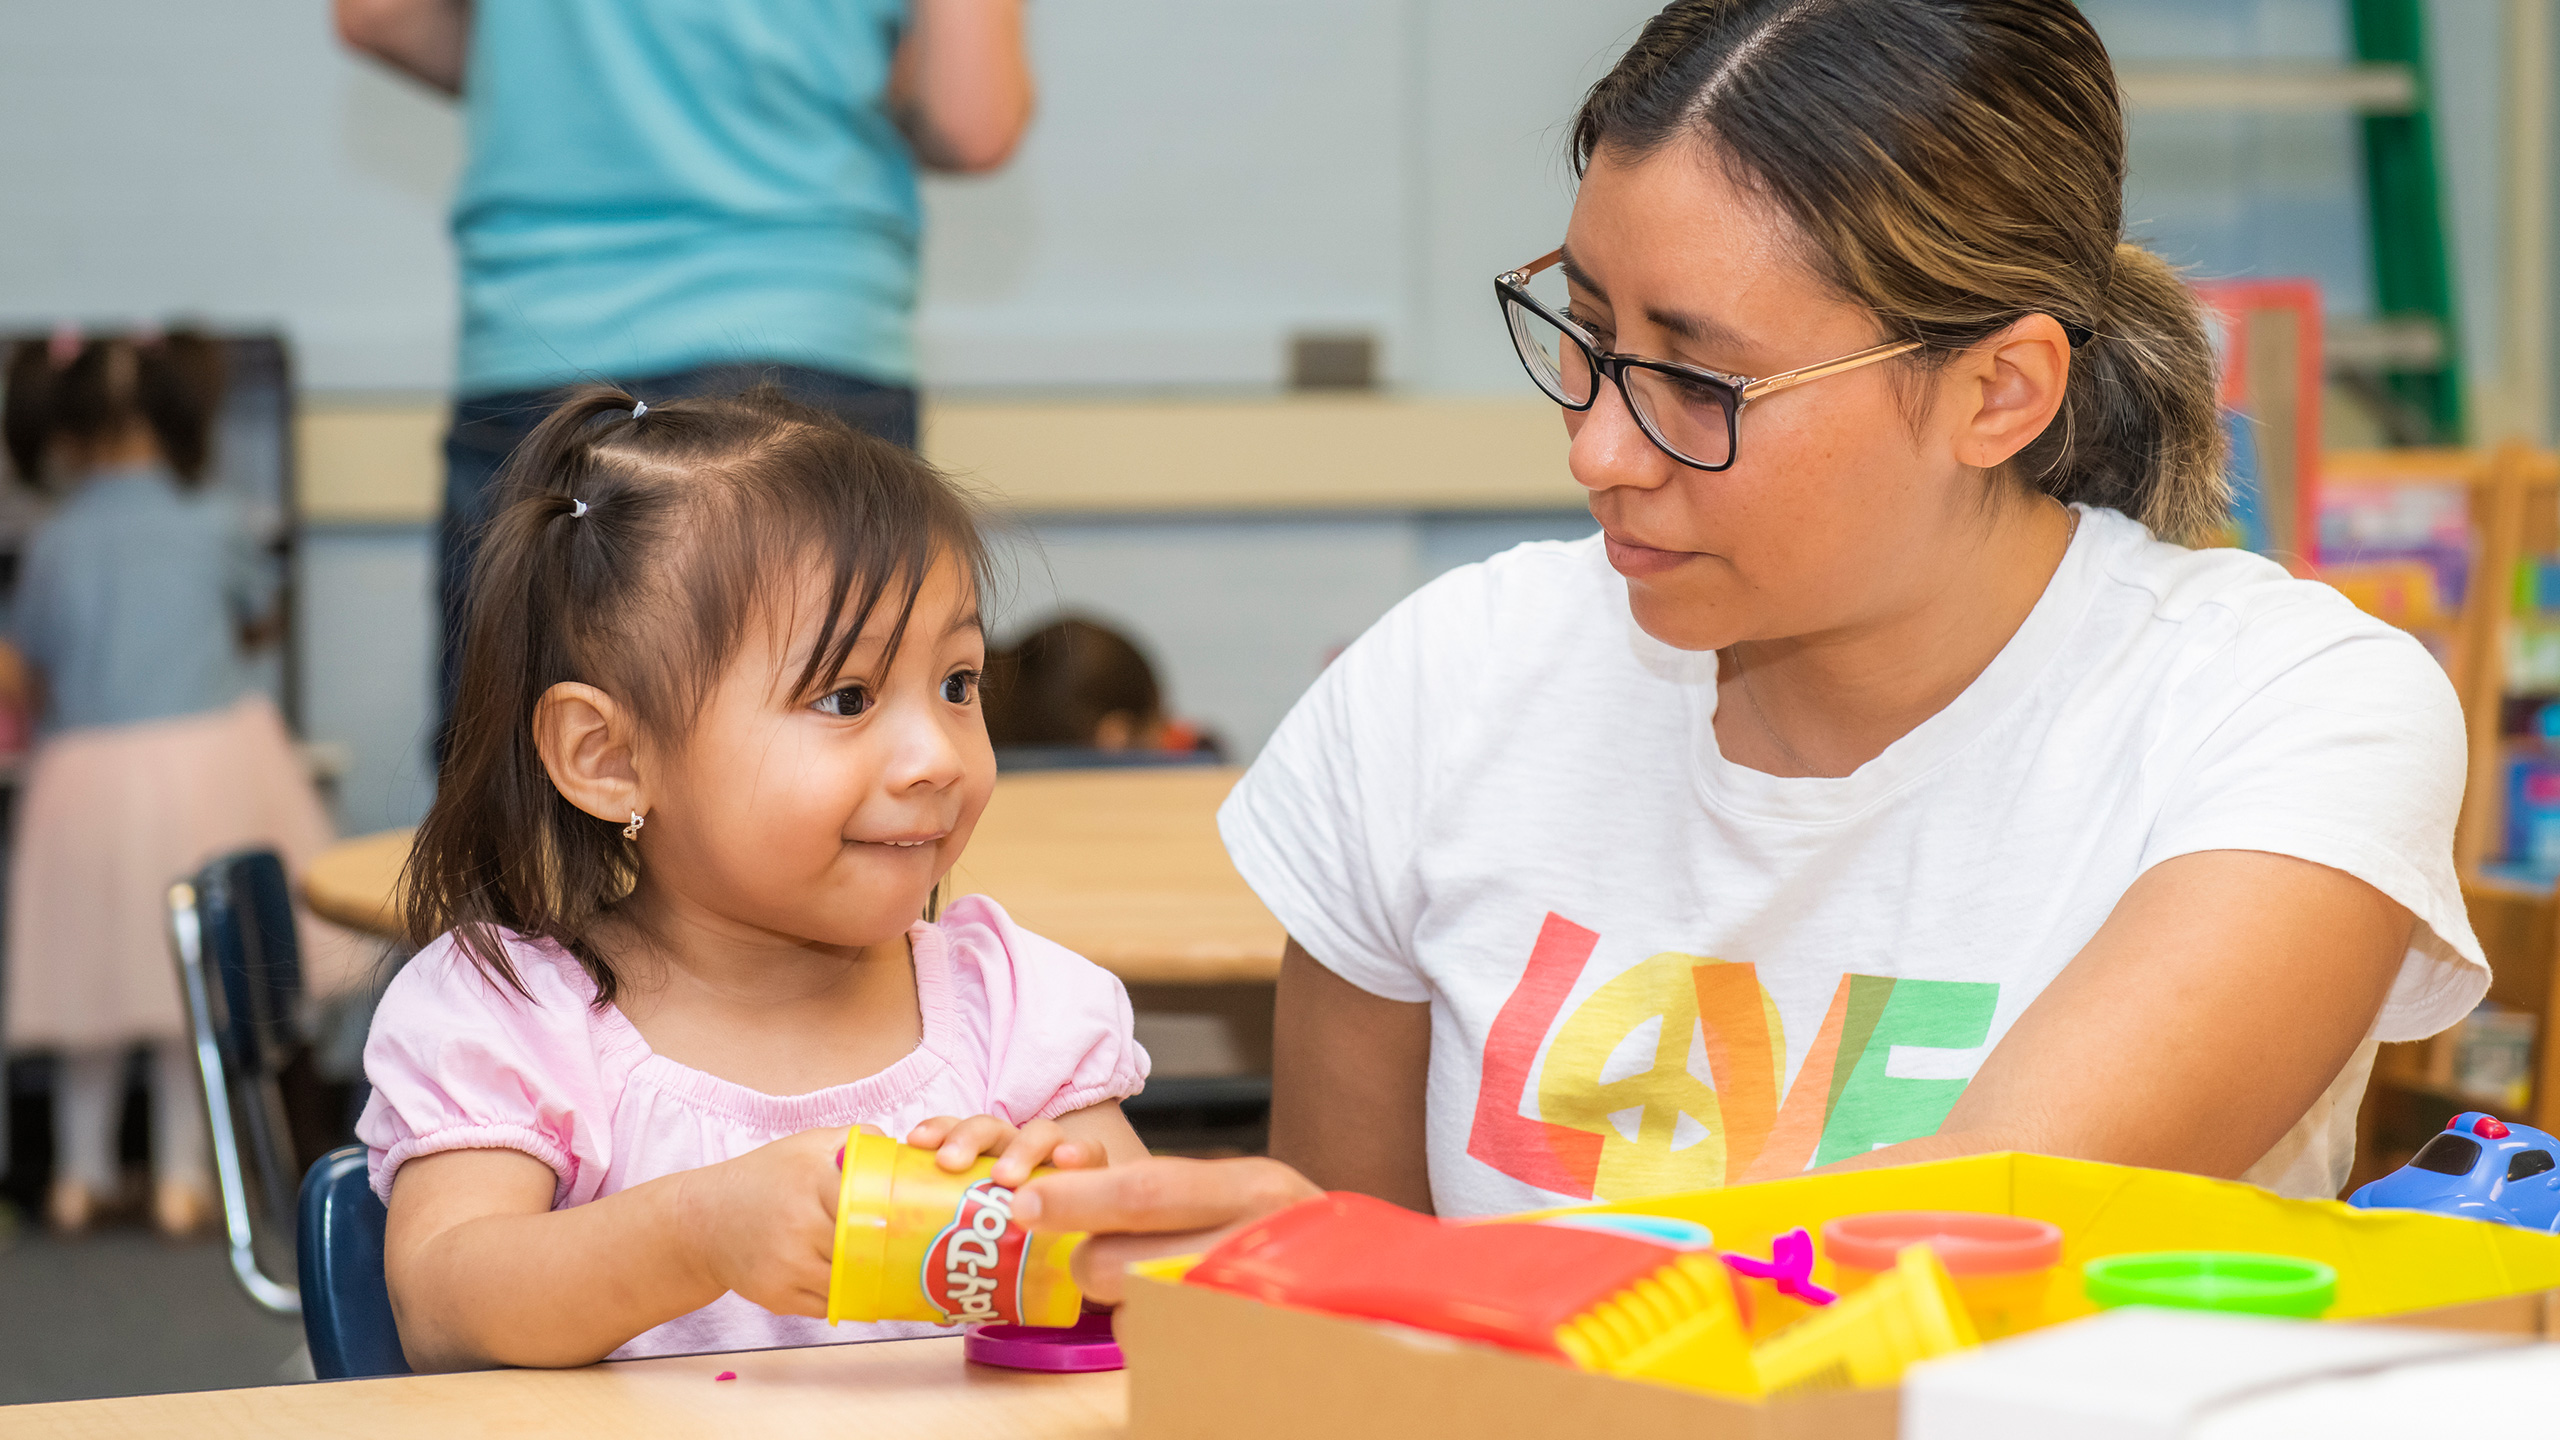 An image of a woman with glasses sitting at a child's table with a smiling kid playing with Play-Dough